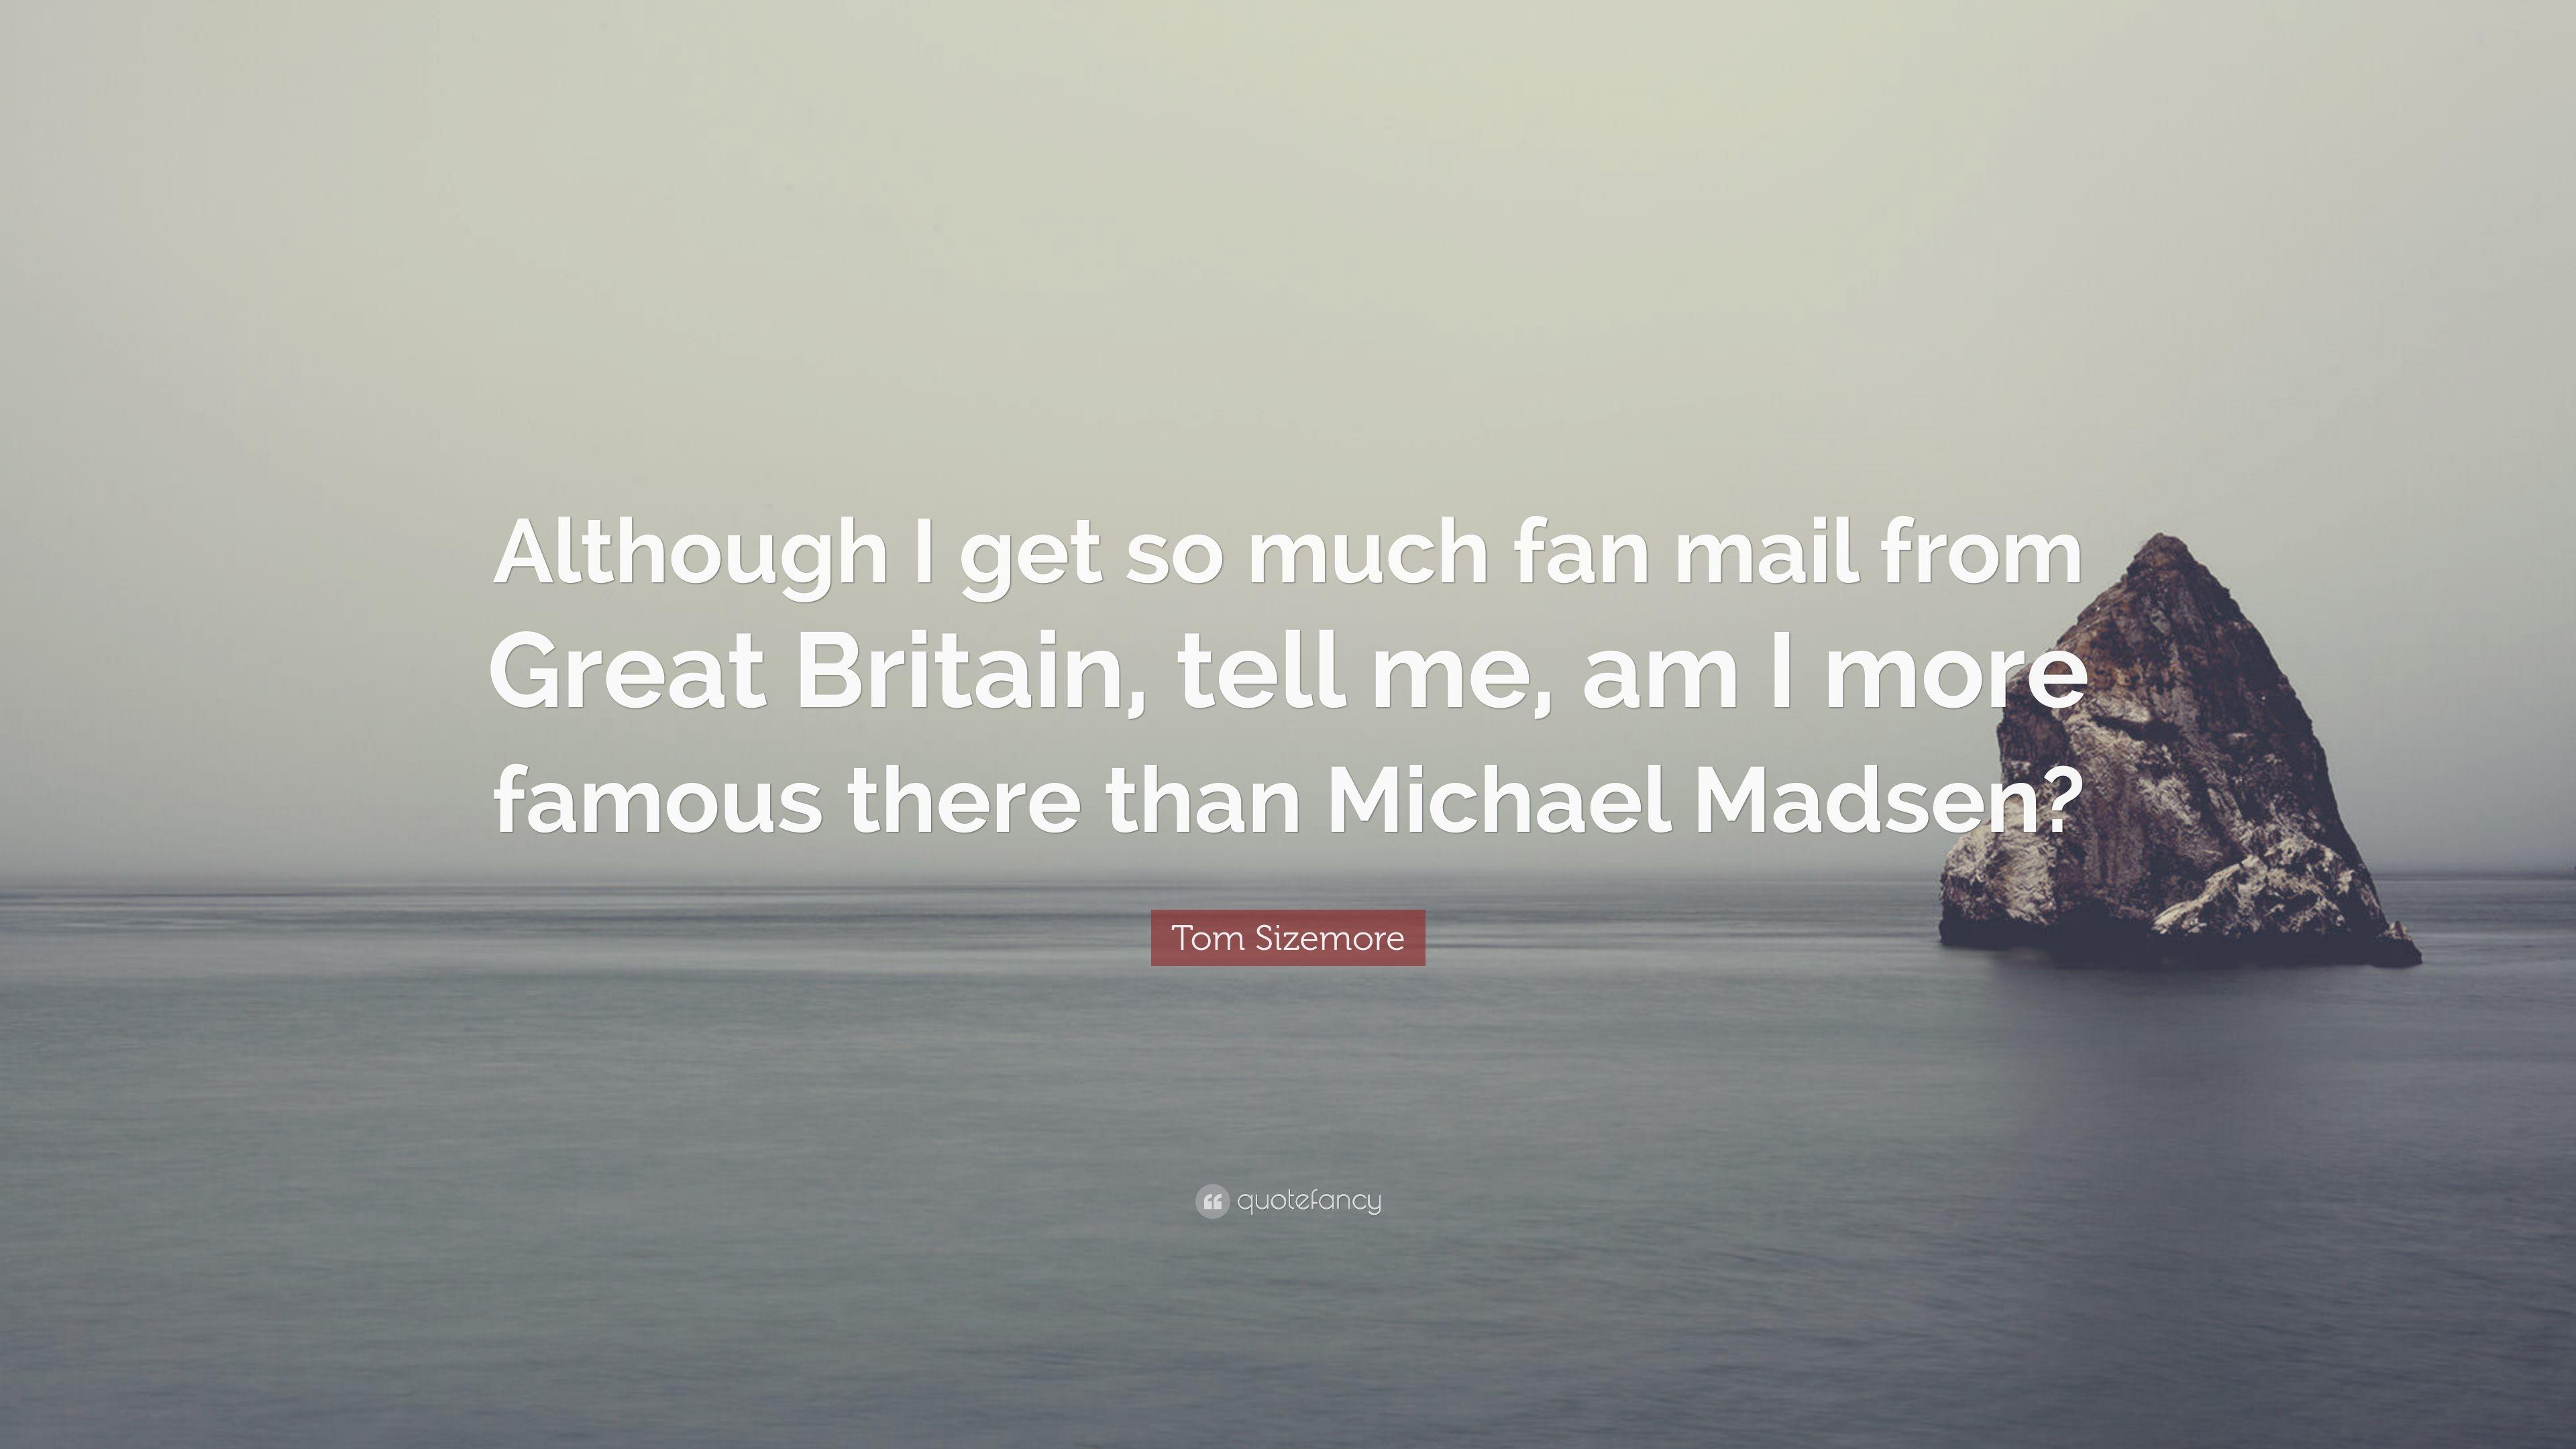 Tom Sizemore Quote: “Although I get so much fan mail from Great